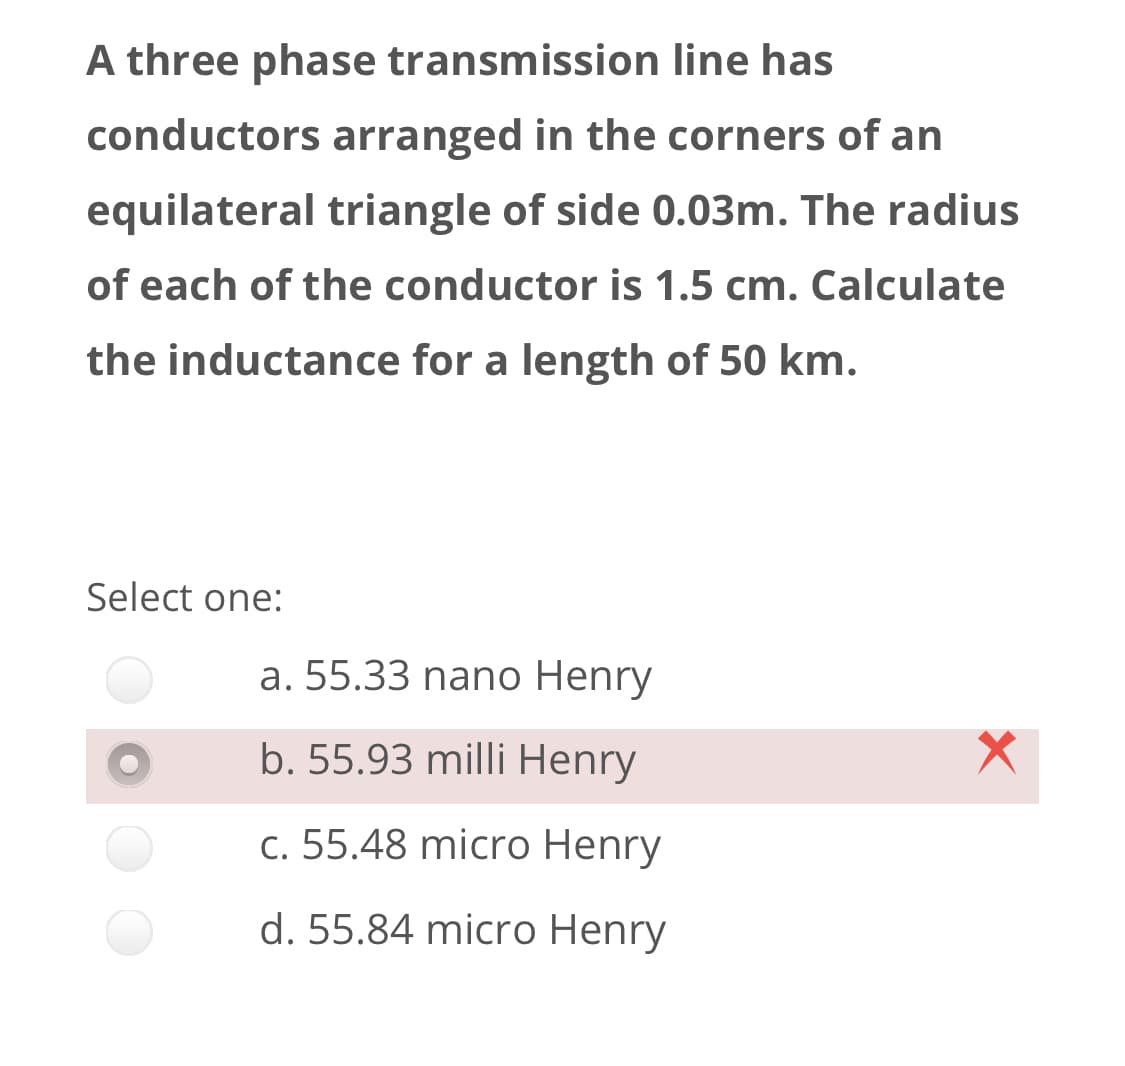 A three phase transmission line has
conductors arranged in the corners of an
equilateral triangle of side 0.03m. The radius
of each of the conductor is 1.5 cm. Calculate
the inductance for a length of 50 km.
Select one:
a. 55.33 nano Henry
b. 55.93 milli Henry
c. 55.48 micro Henry
d. 55.84 micro Henry
